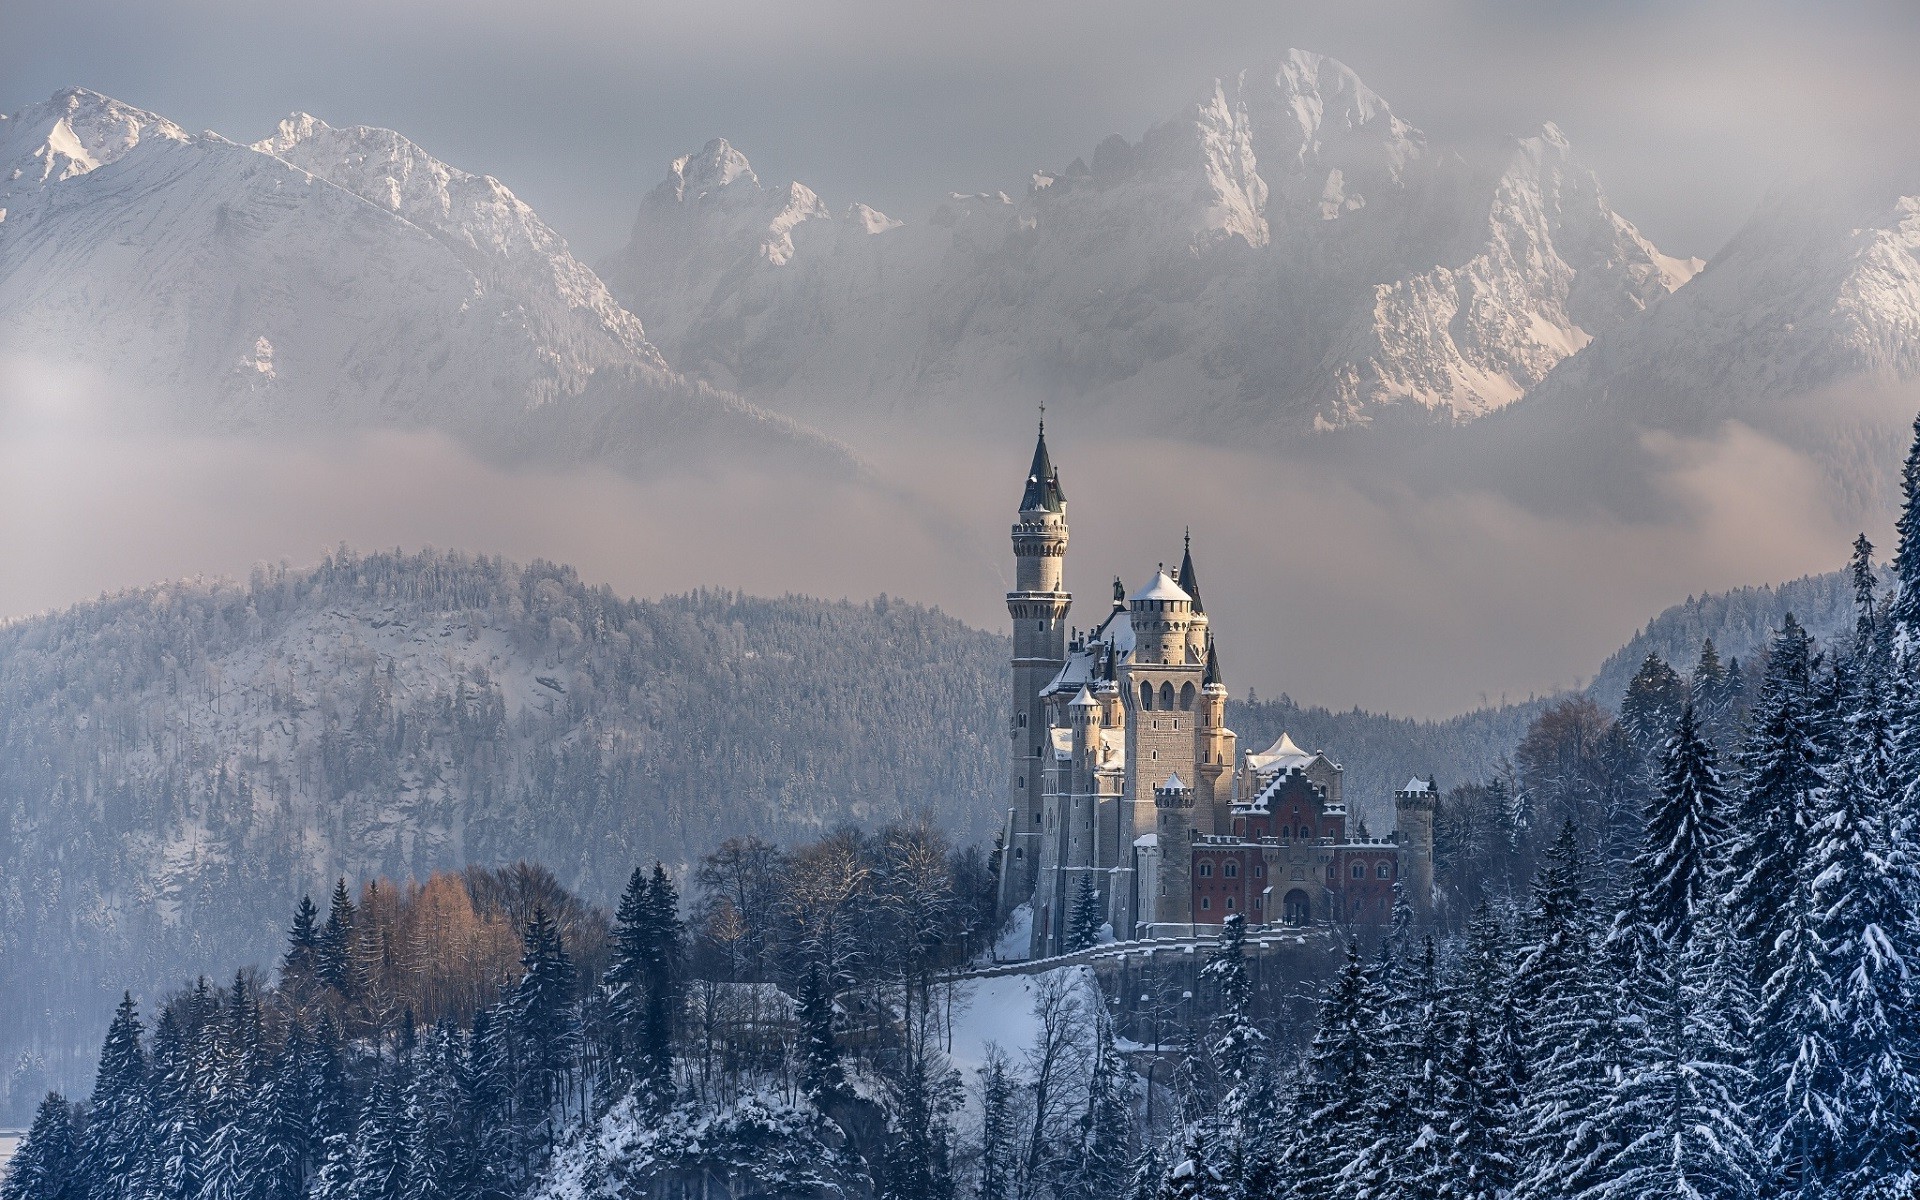 nature, Landscape, Mountain, Forest, Trees, Winter, Snow, Castle, Building, Germany Wallpaper